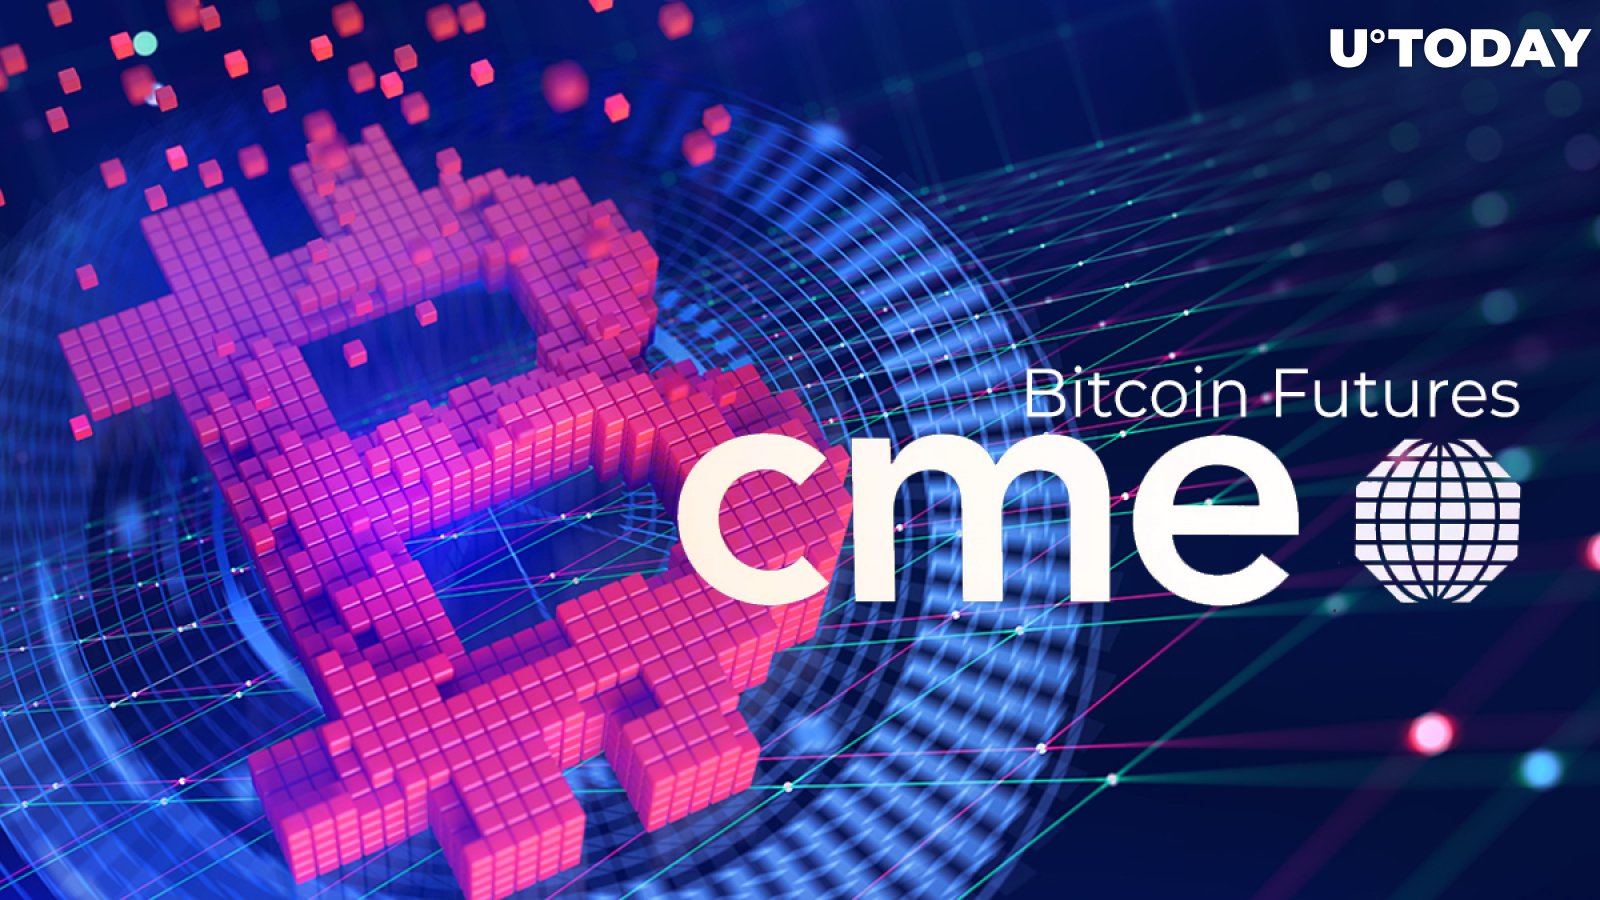 Bitcoin Futures Offered by CME Now in Third Spot, Behind Only These Two Exchanges